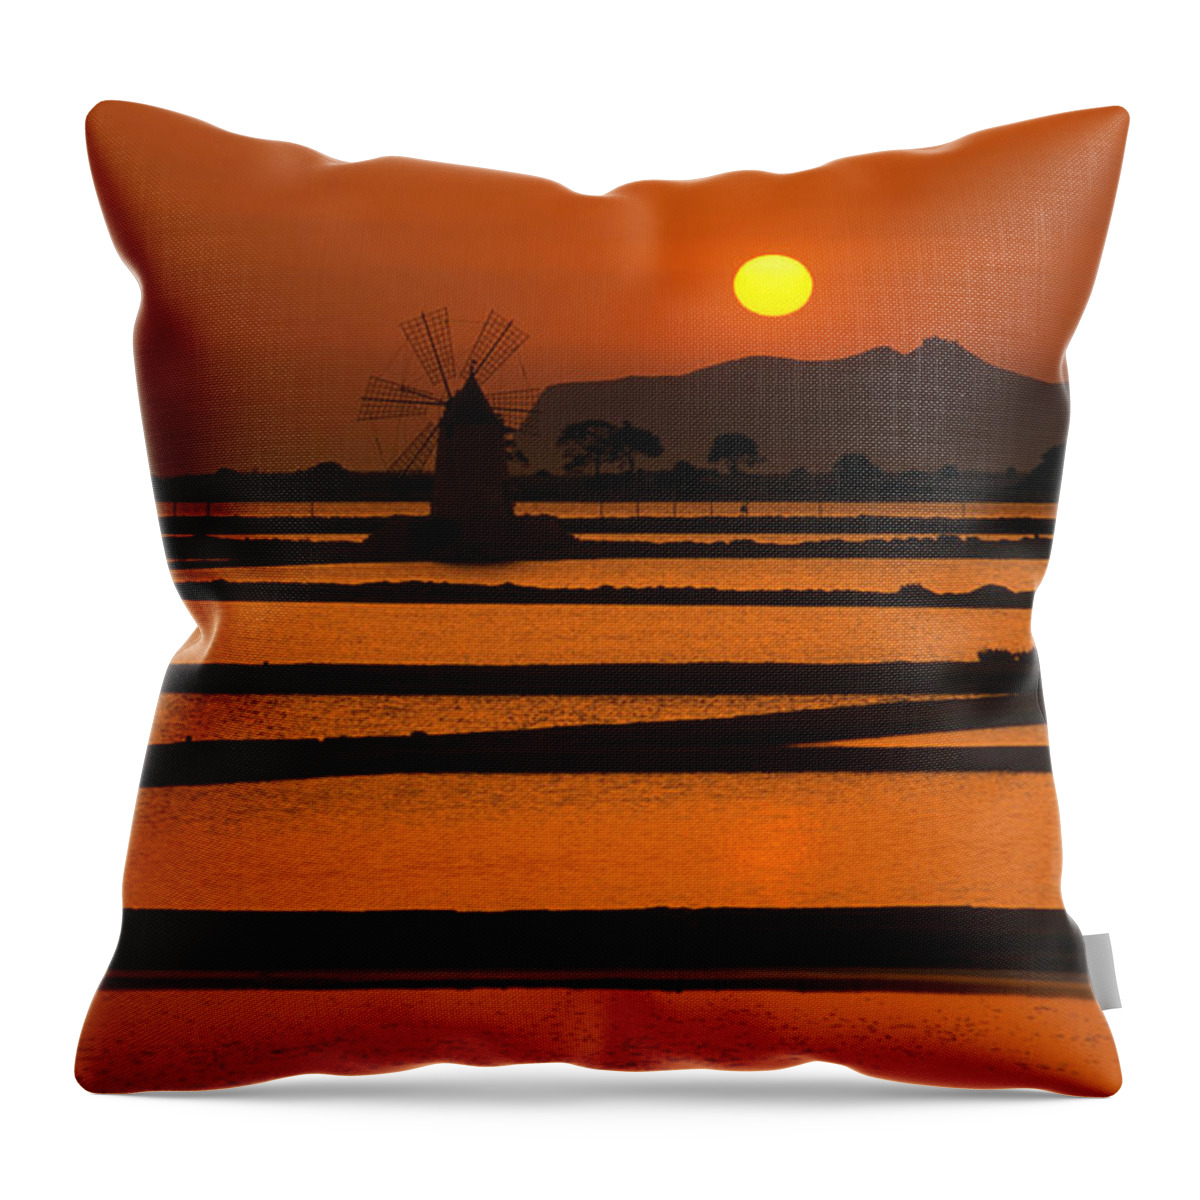 Environmental Conservation Throw Pillow featuring the photograph Sunset Over The Saltpans And A Windmill by Dallas Stribley